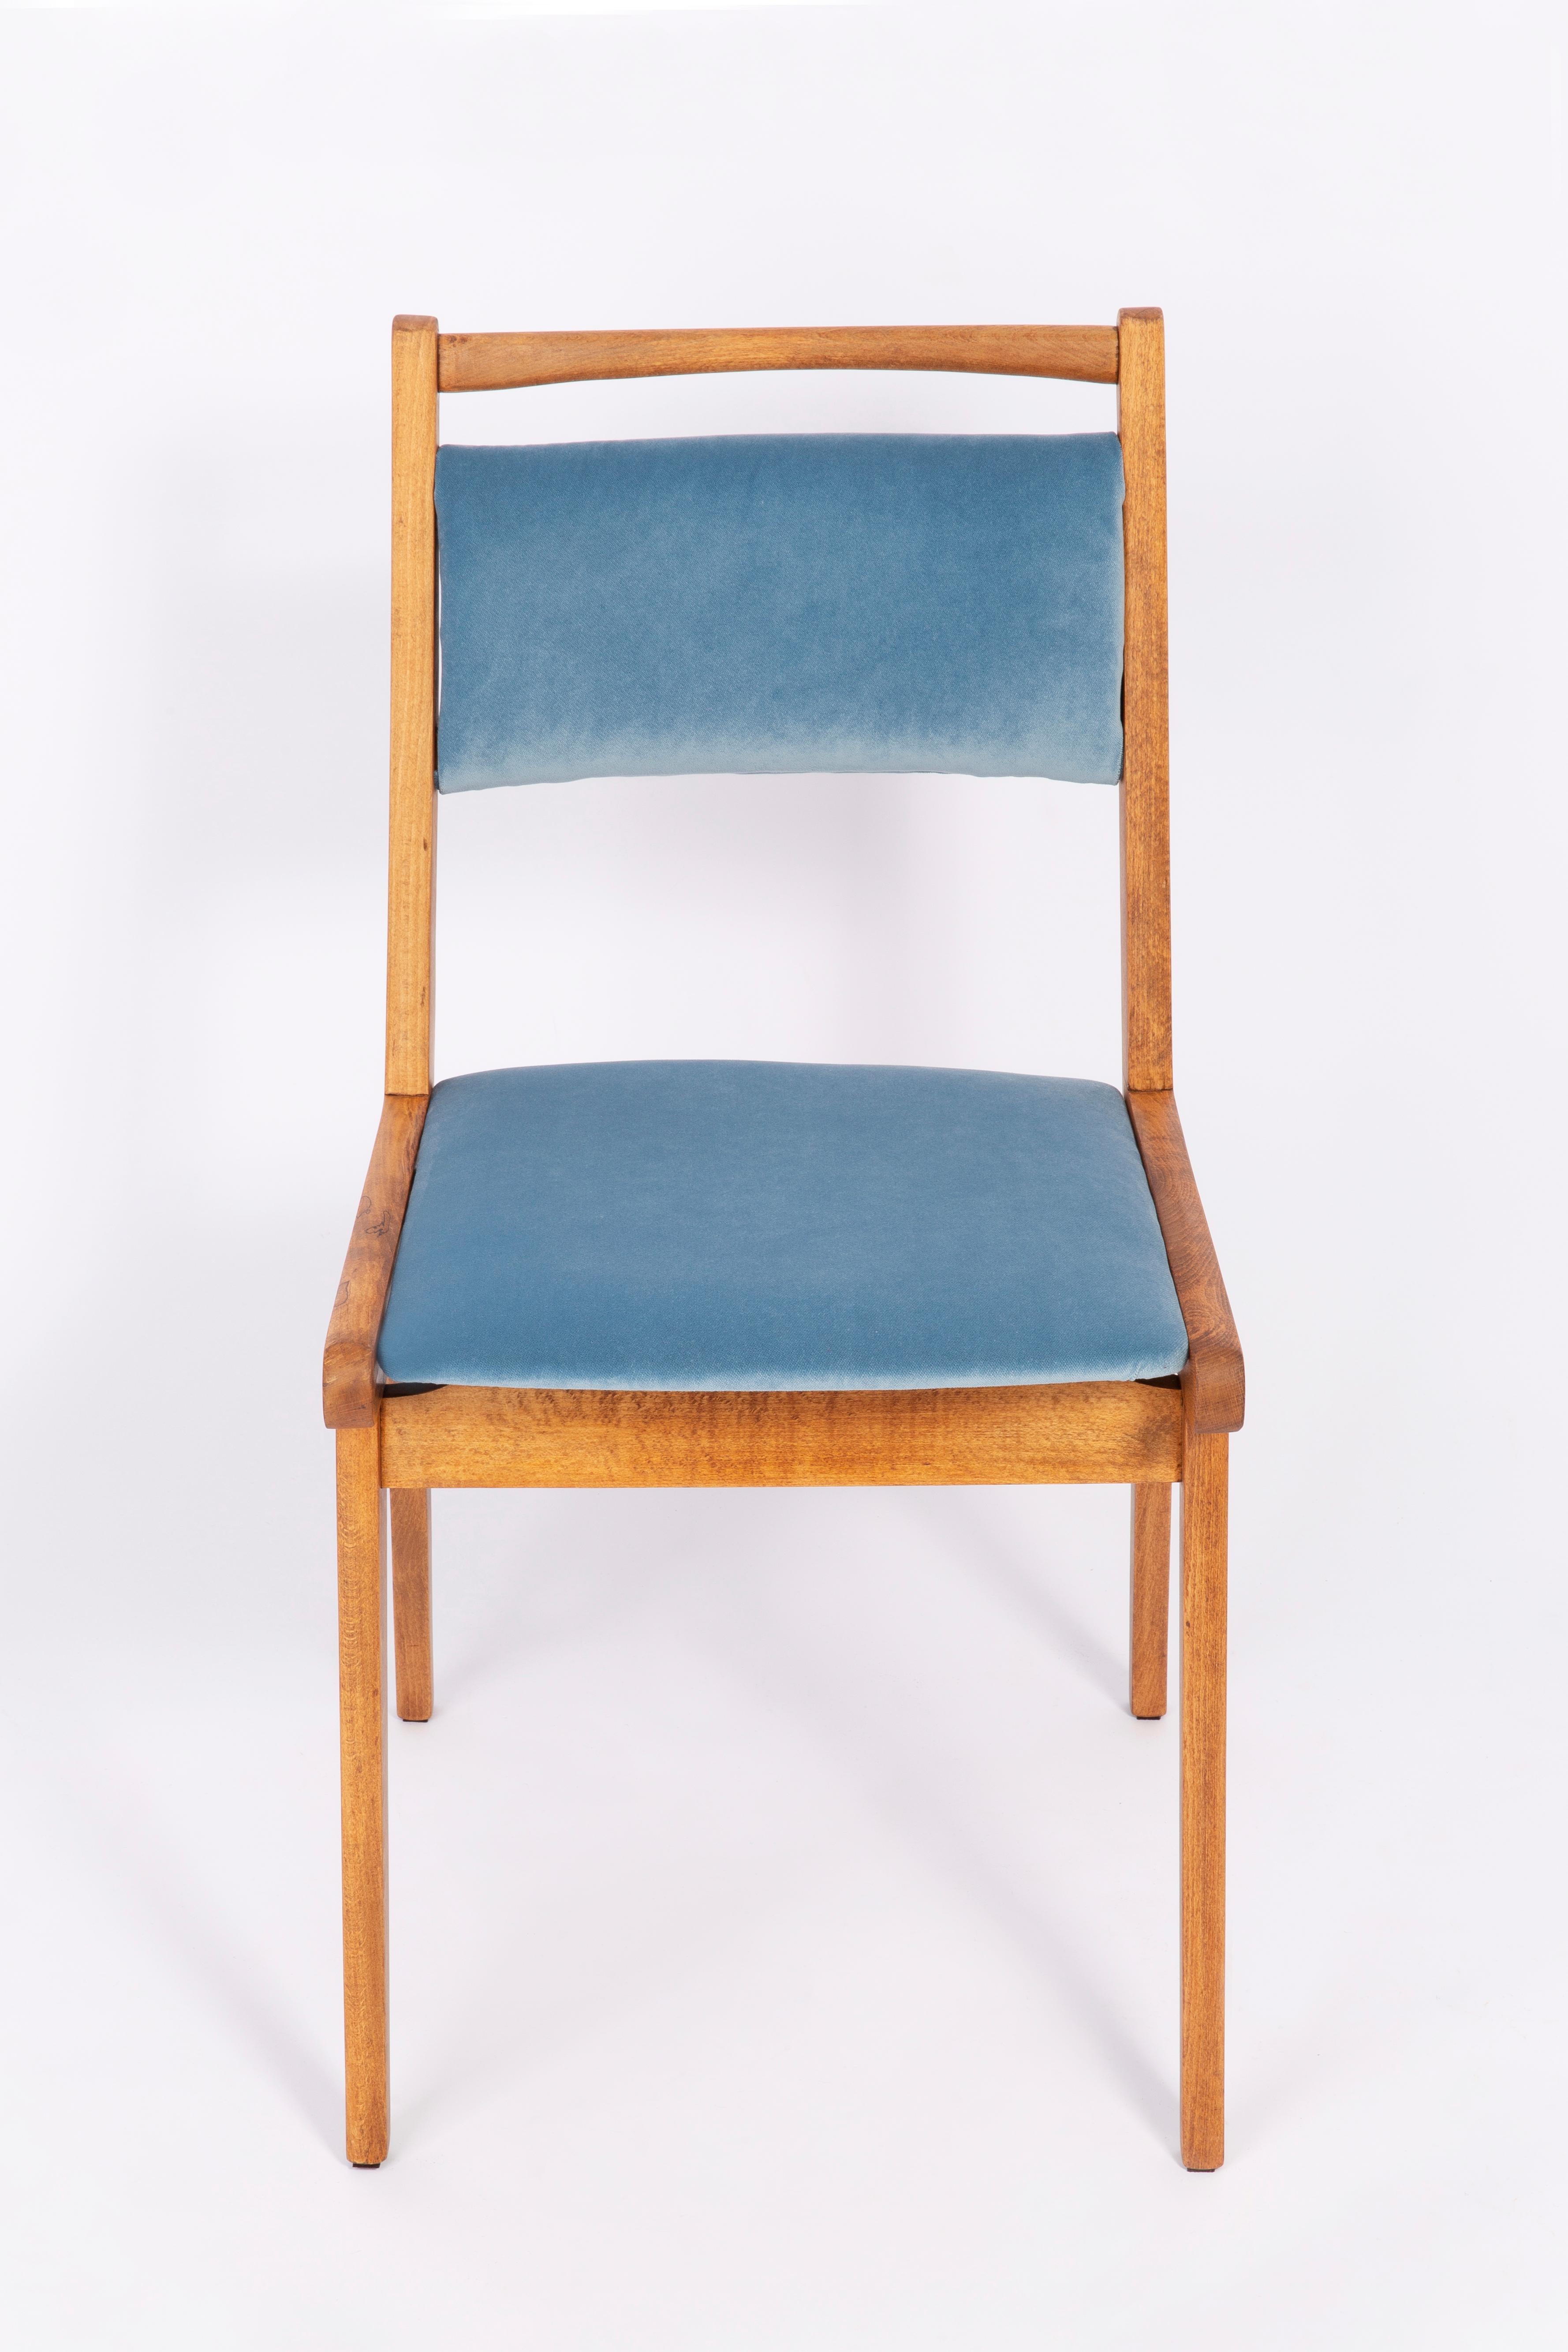 Set of Two 20th Century Blue and White Velvet Chairs, Poland, 1960s For Sale 8